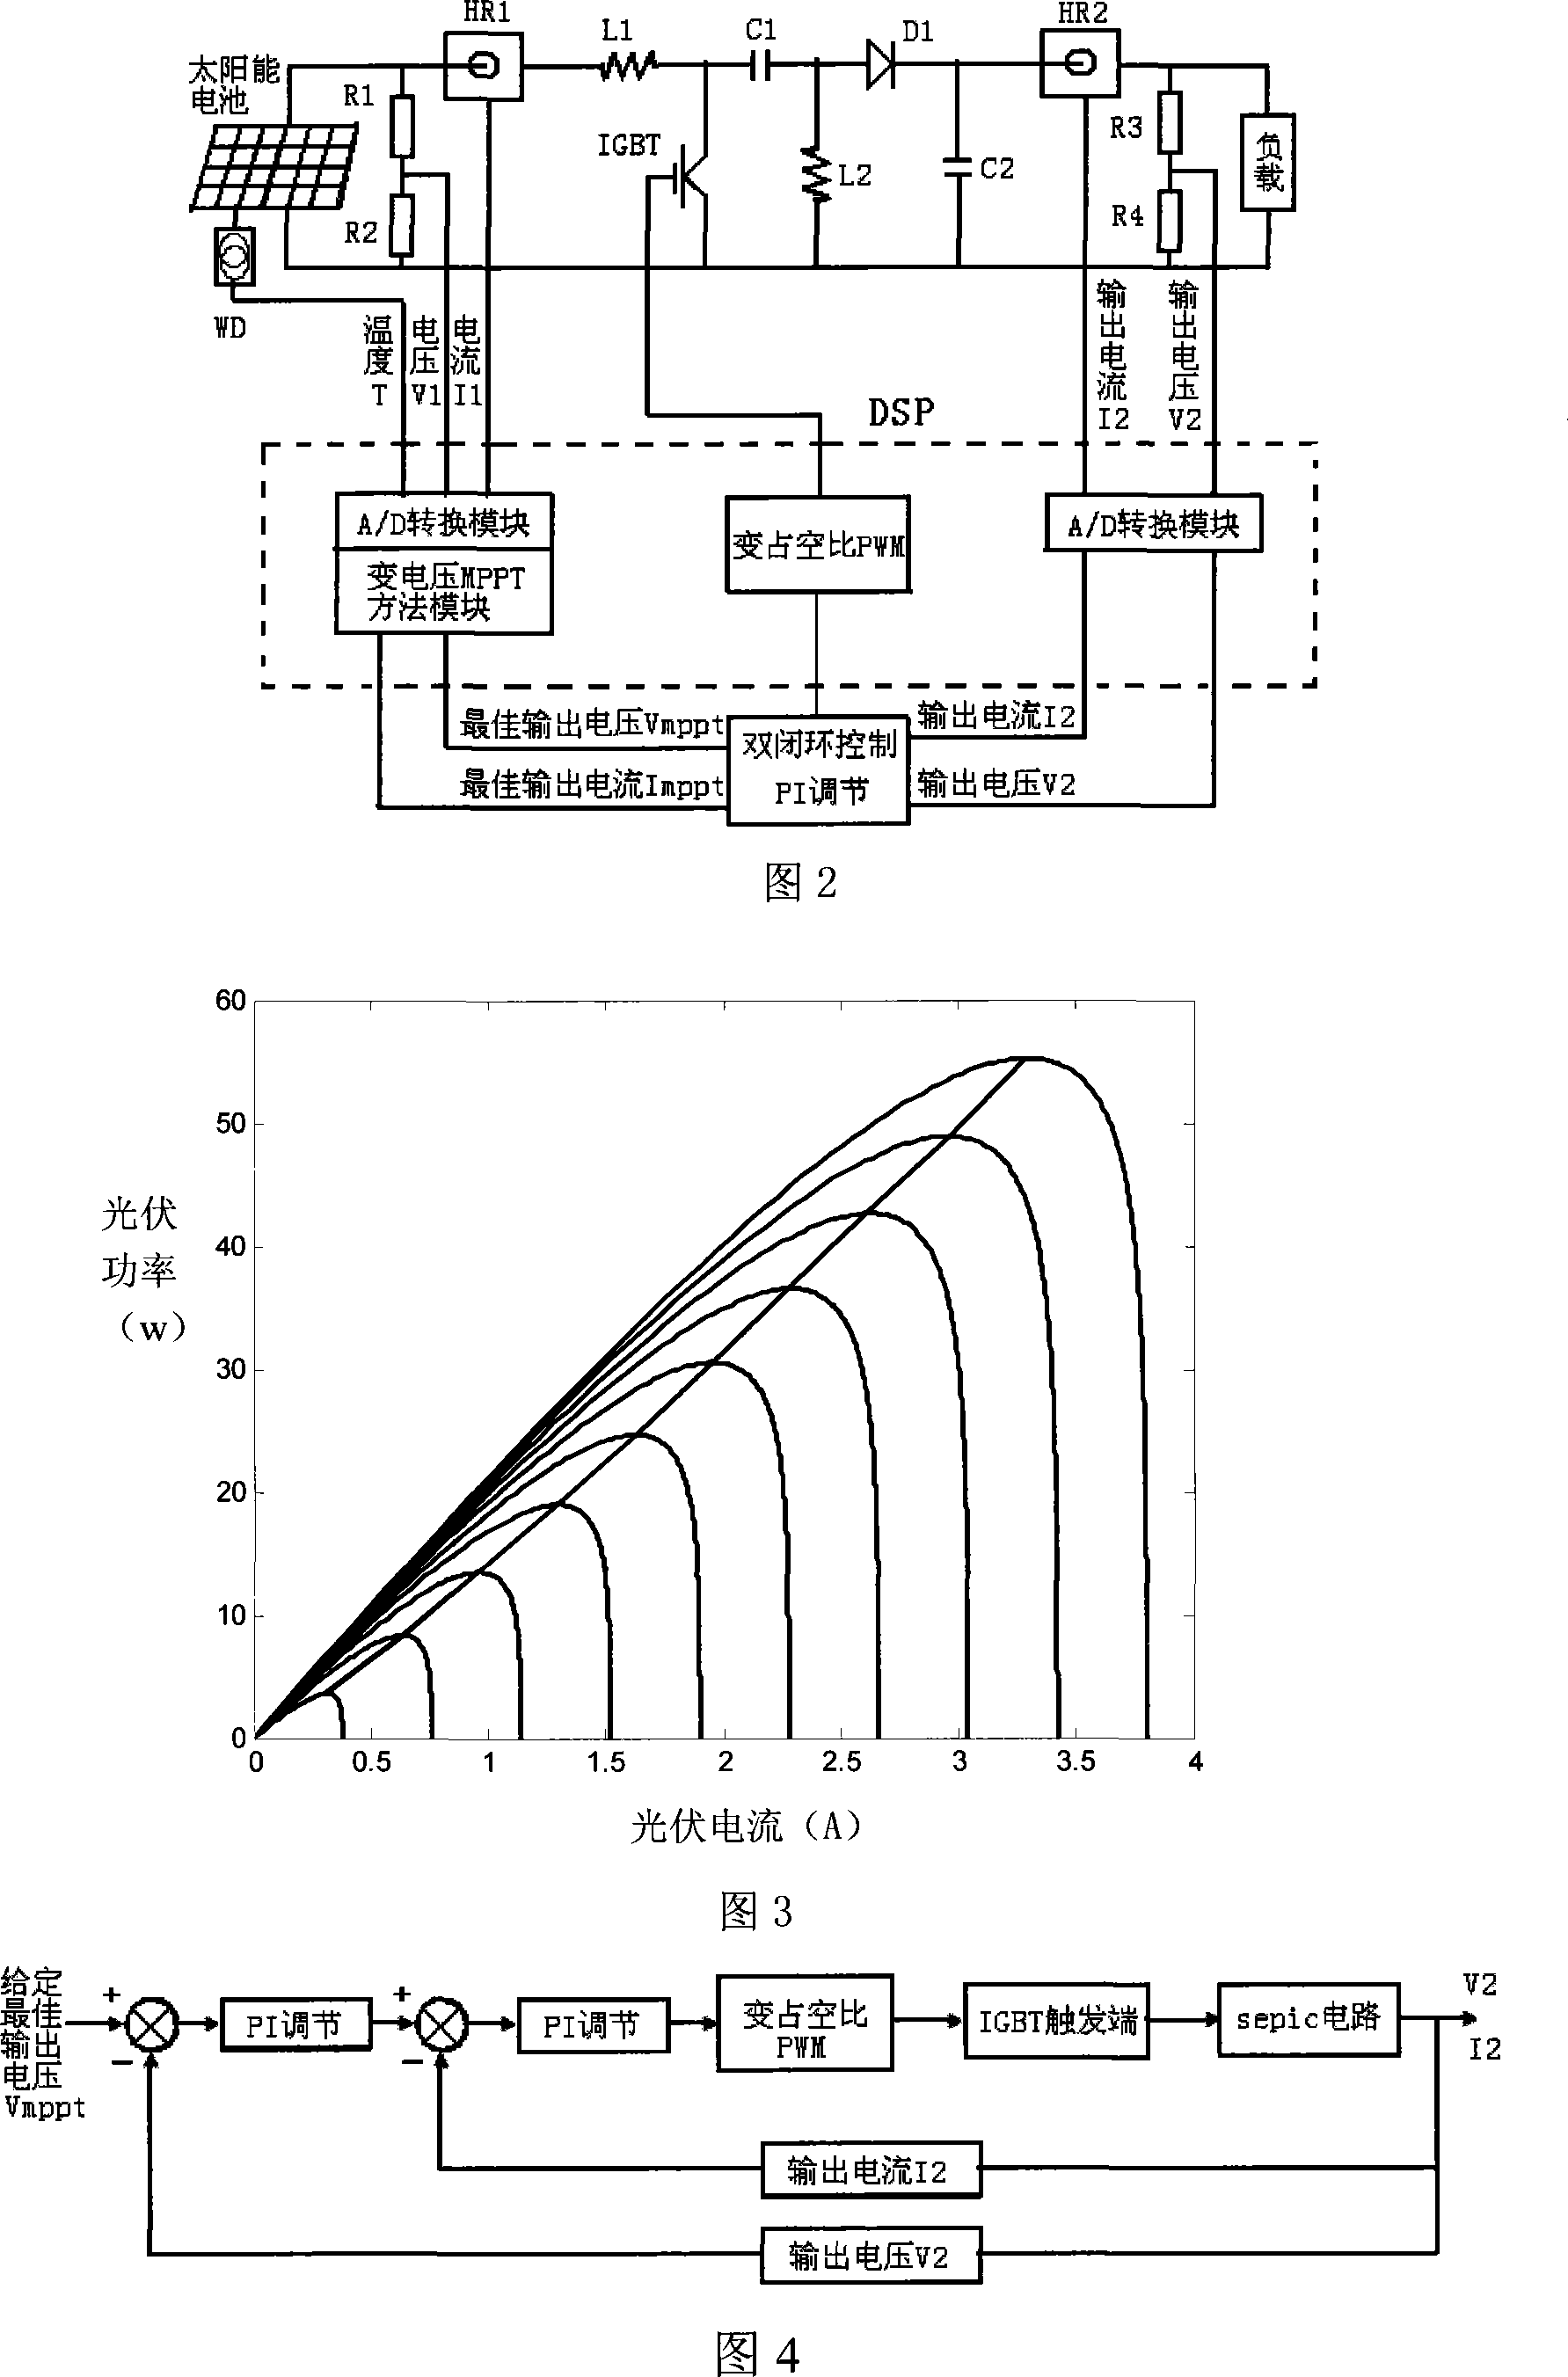 Voltage-variable photovoltaic system maximal power tracing control method adapting to weather status